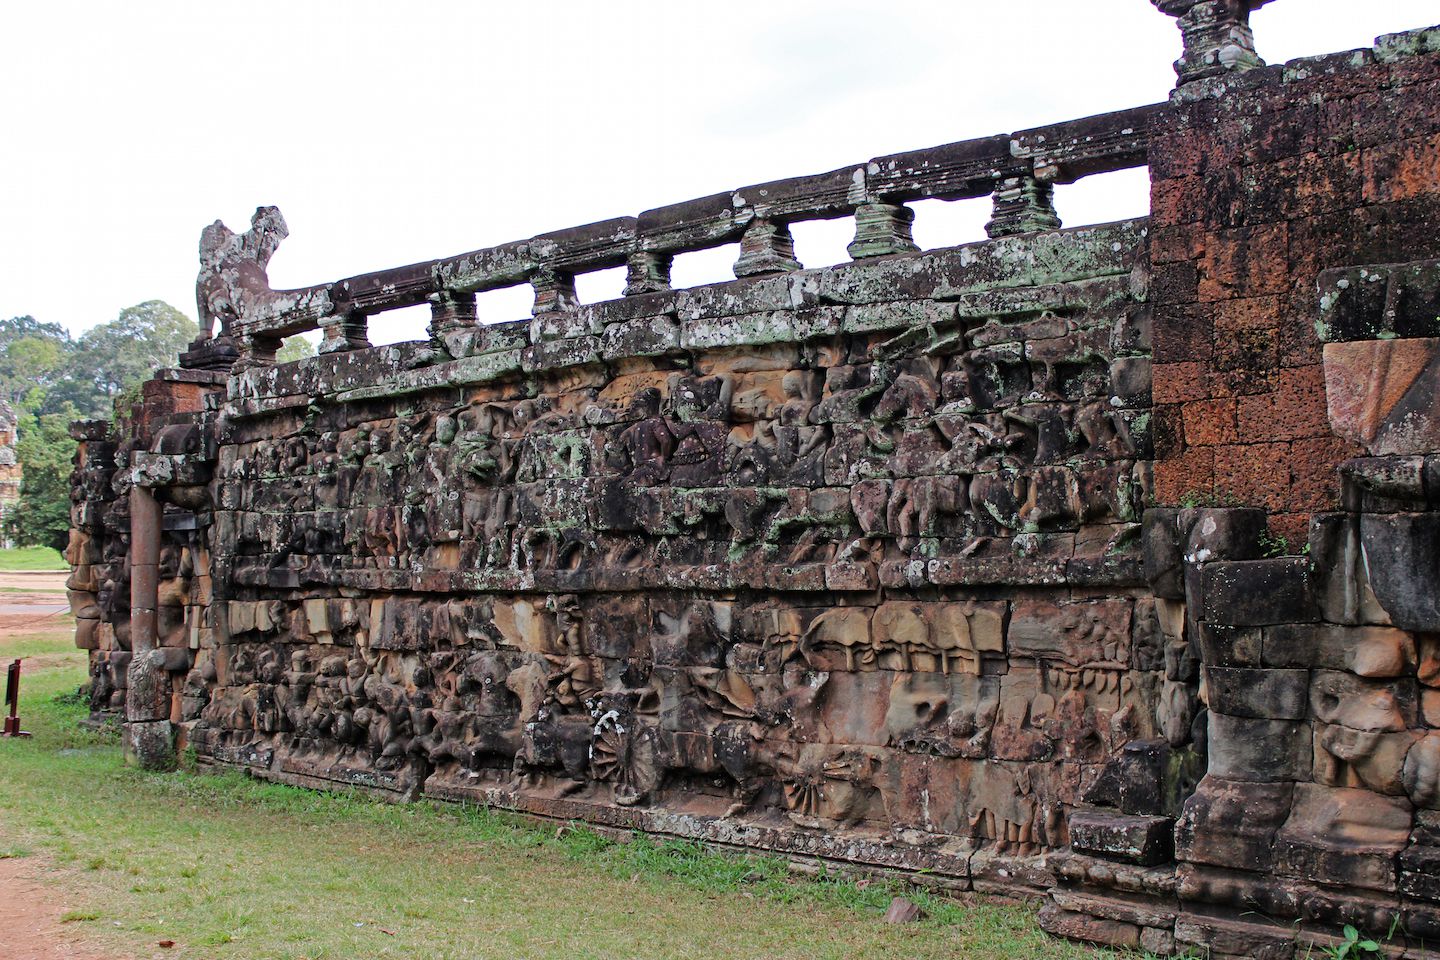 Carvings on the side walls of the Leper King Terrace in Angkor Thom